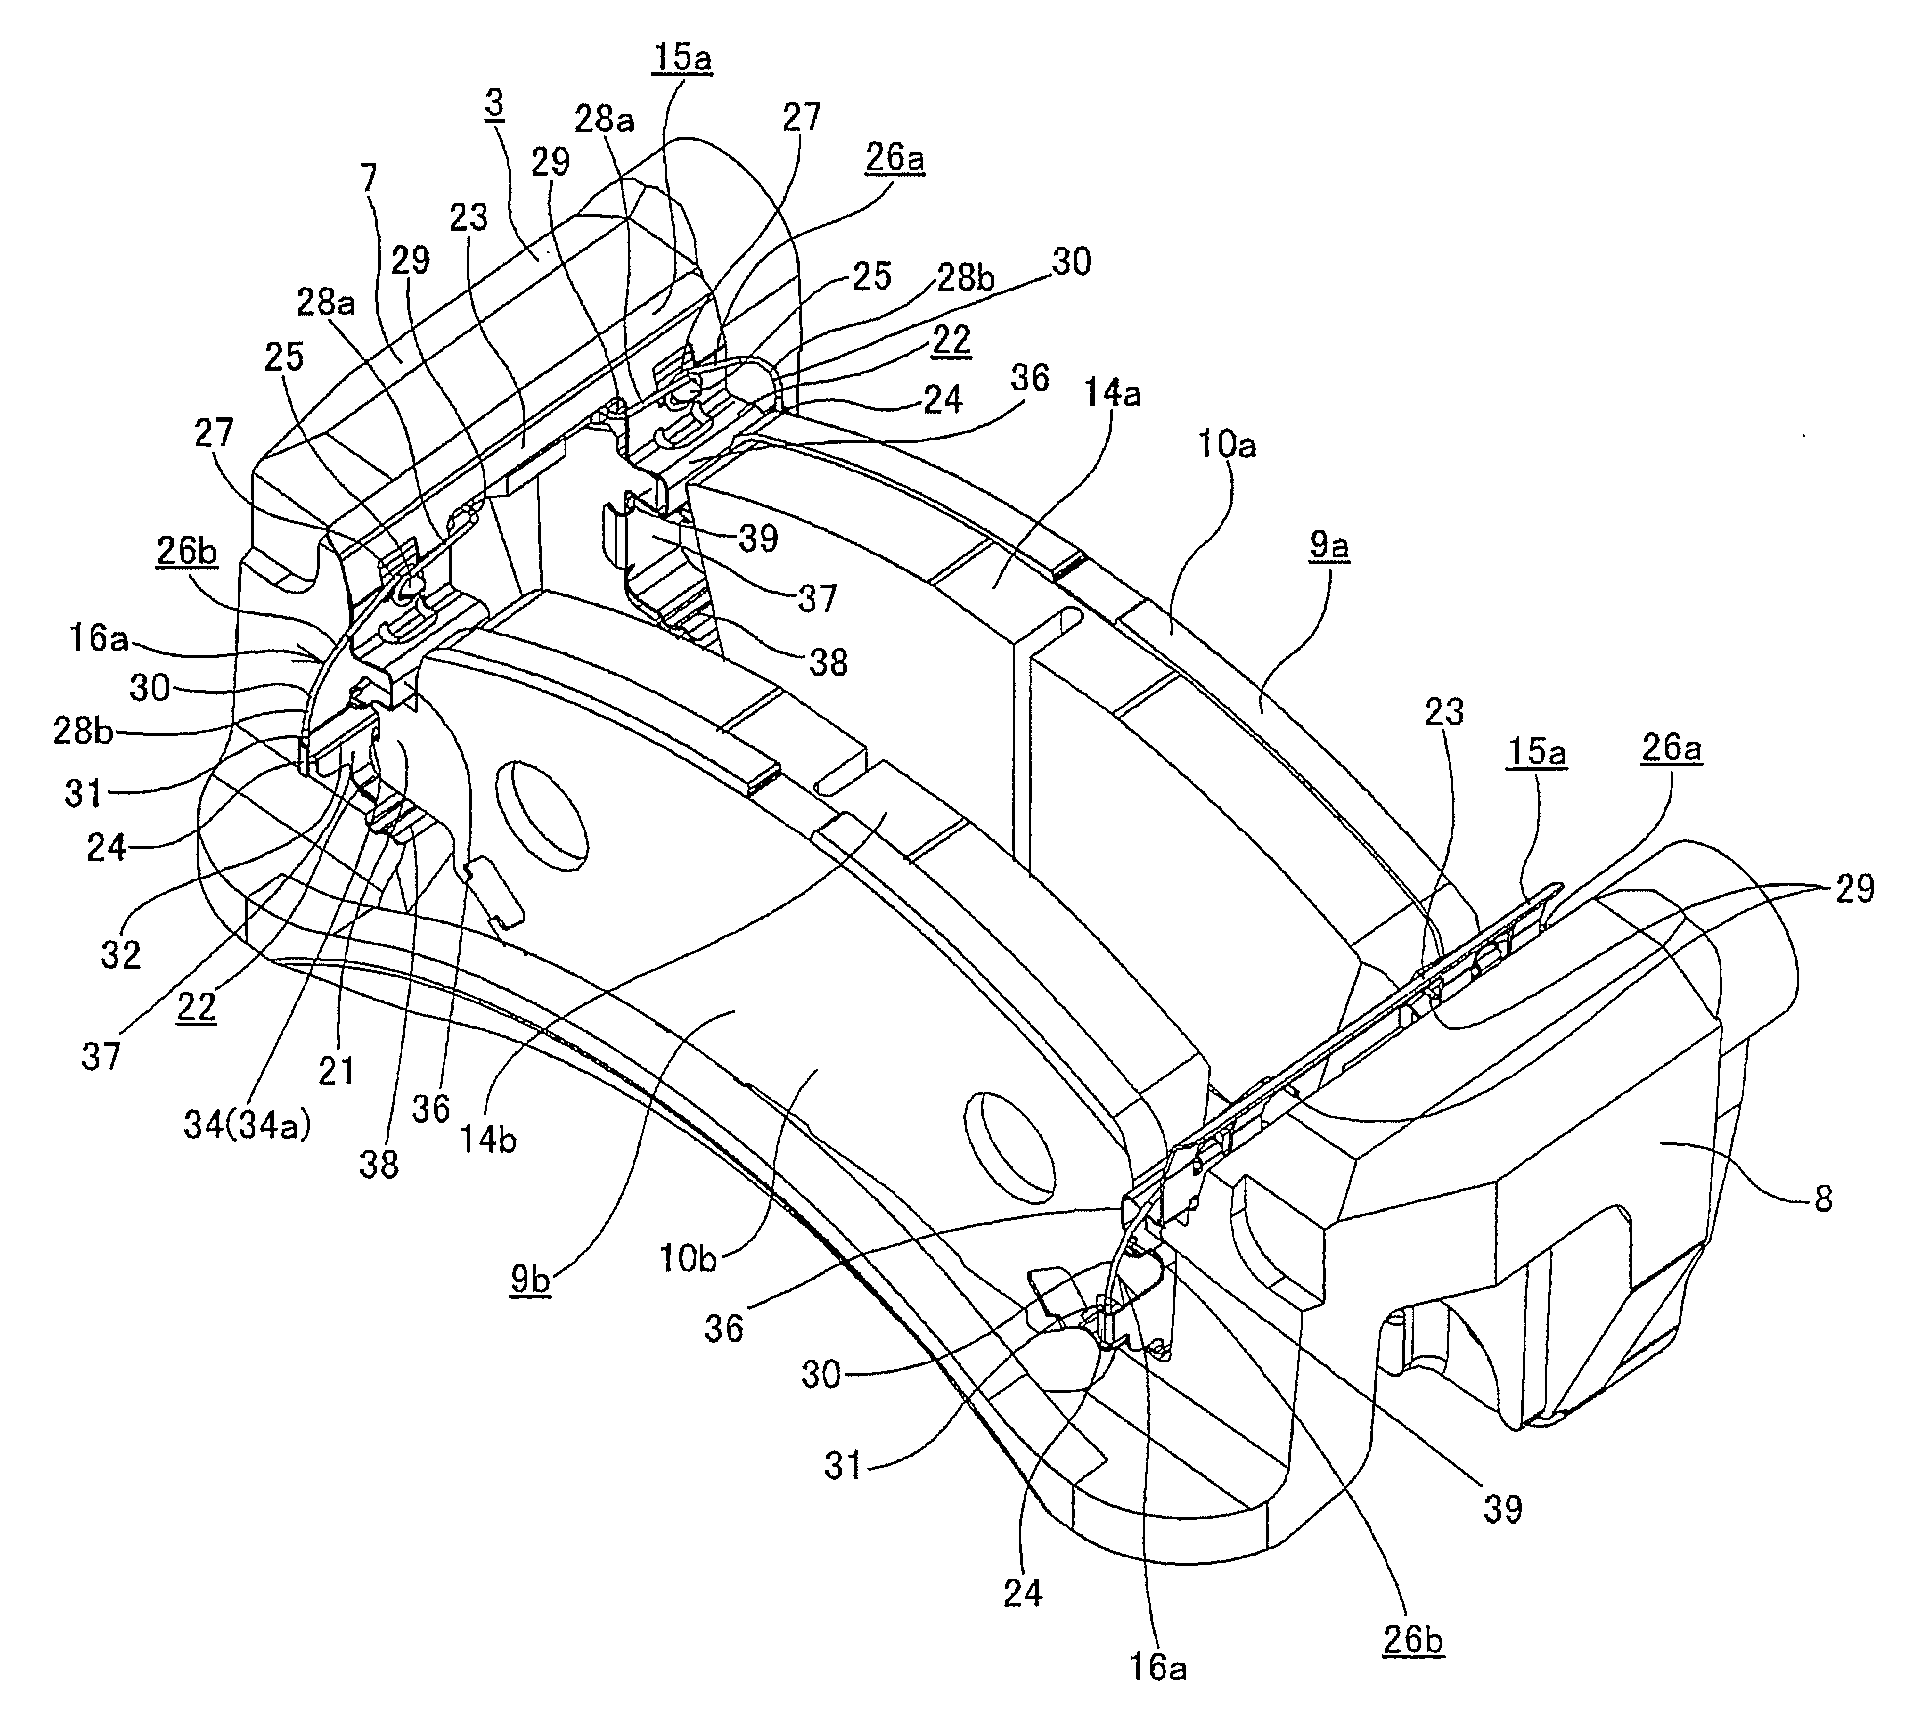 Floating disc brake, method of assembling same, and assemblies consisting of pad clips and return springs